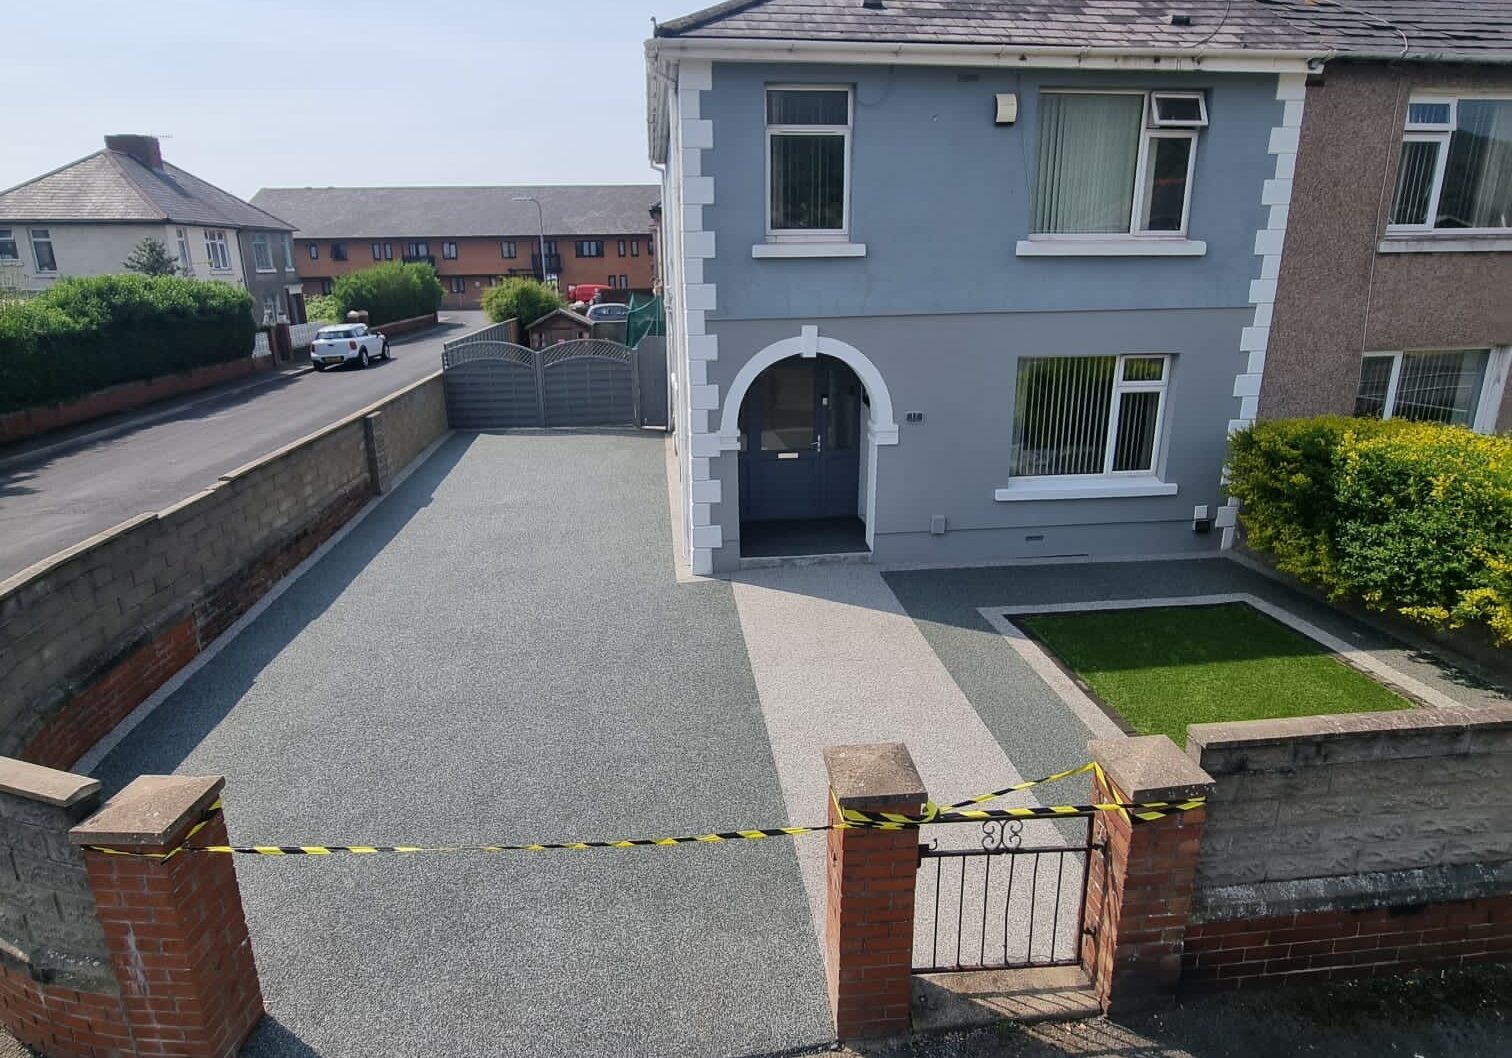 This is a photo of a Resin driveway carried out in Cardiff. All works done by Resin Driveways Cardiff